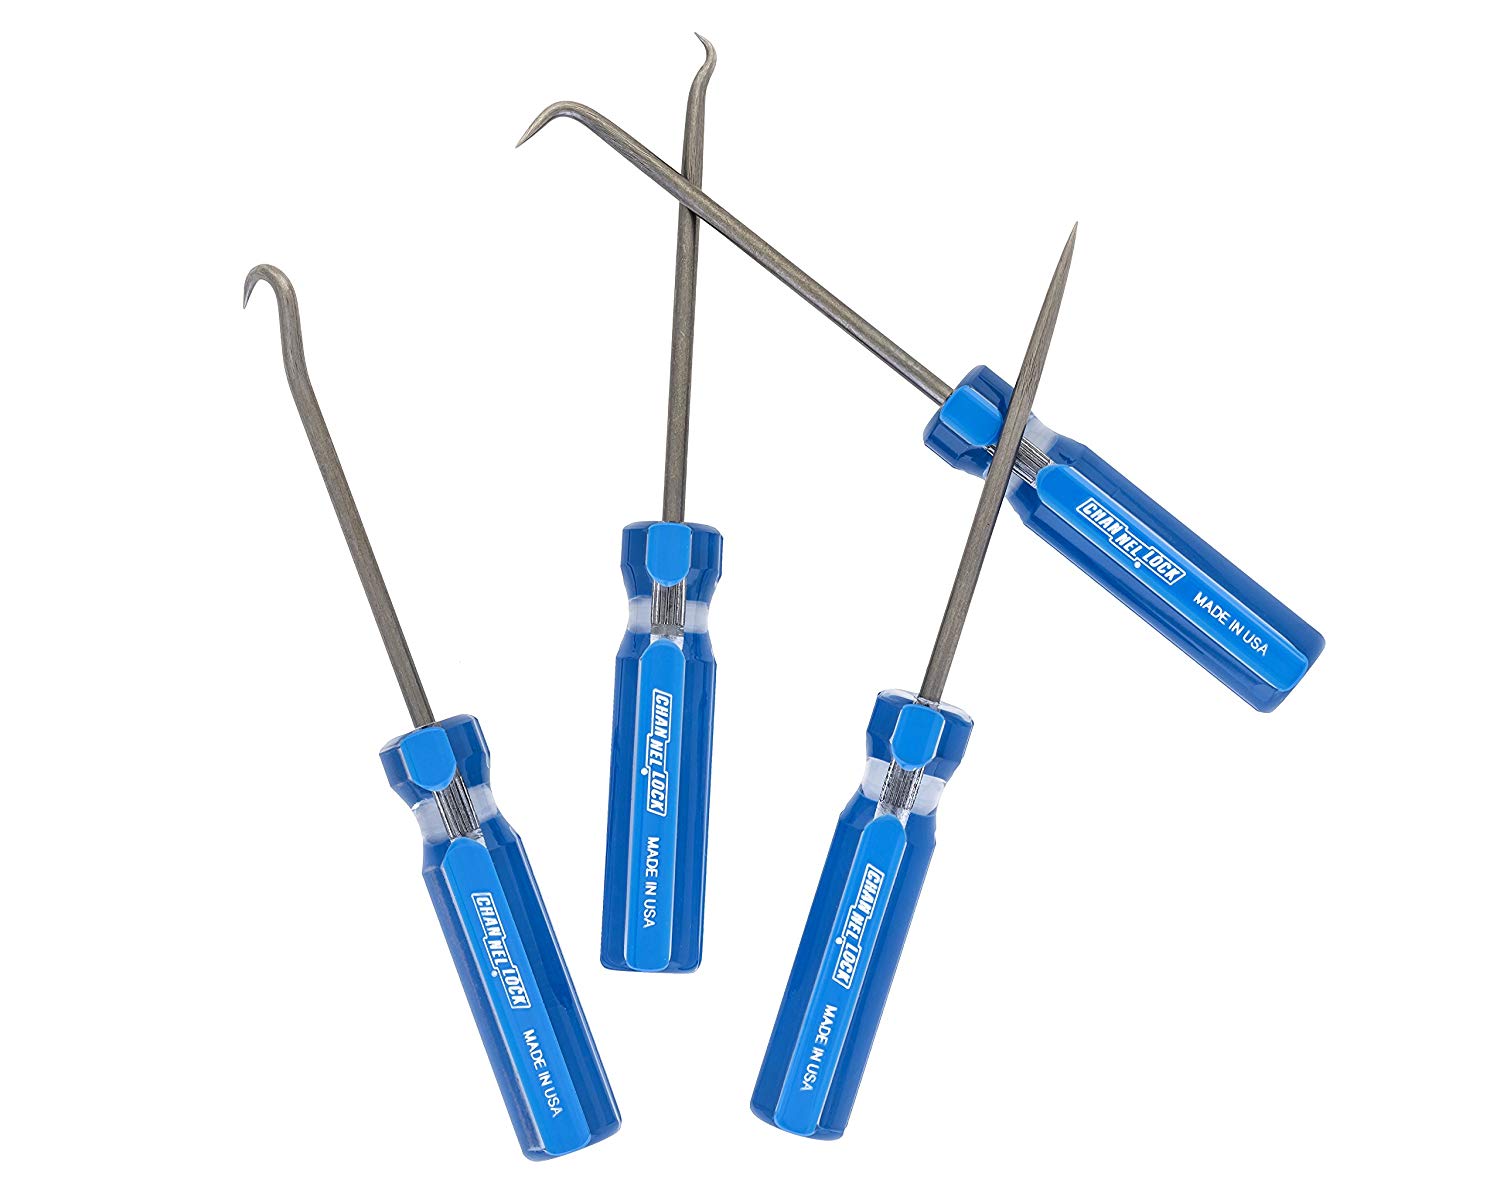 ChannelLock HP-4A - 4pc Hook & Pick Set - wise-line-tools